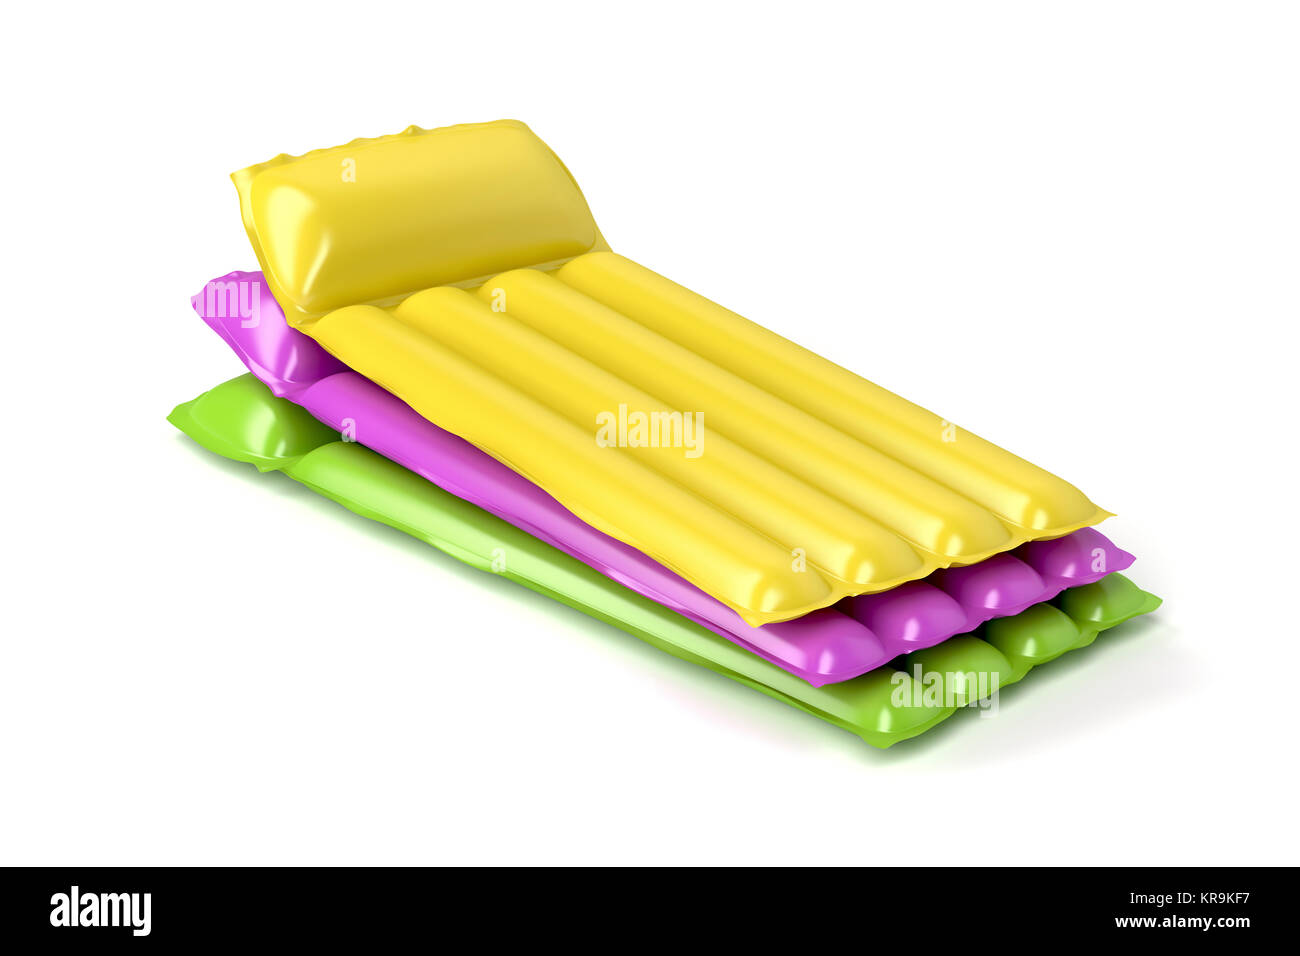 Beach mattresses with different colors Stock Photo